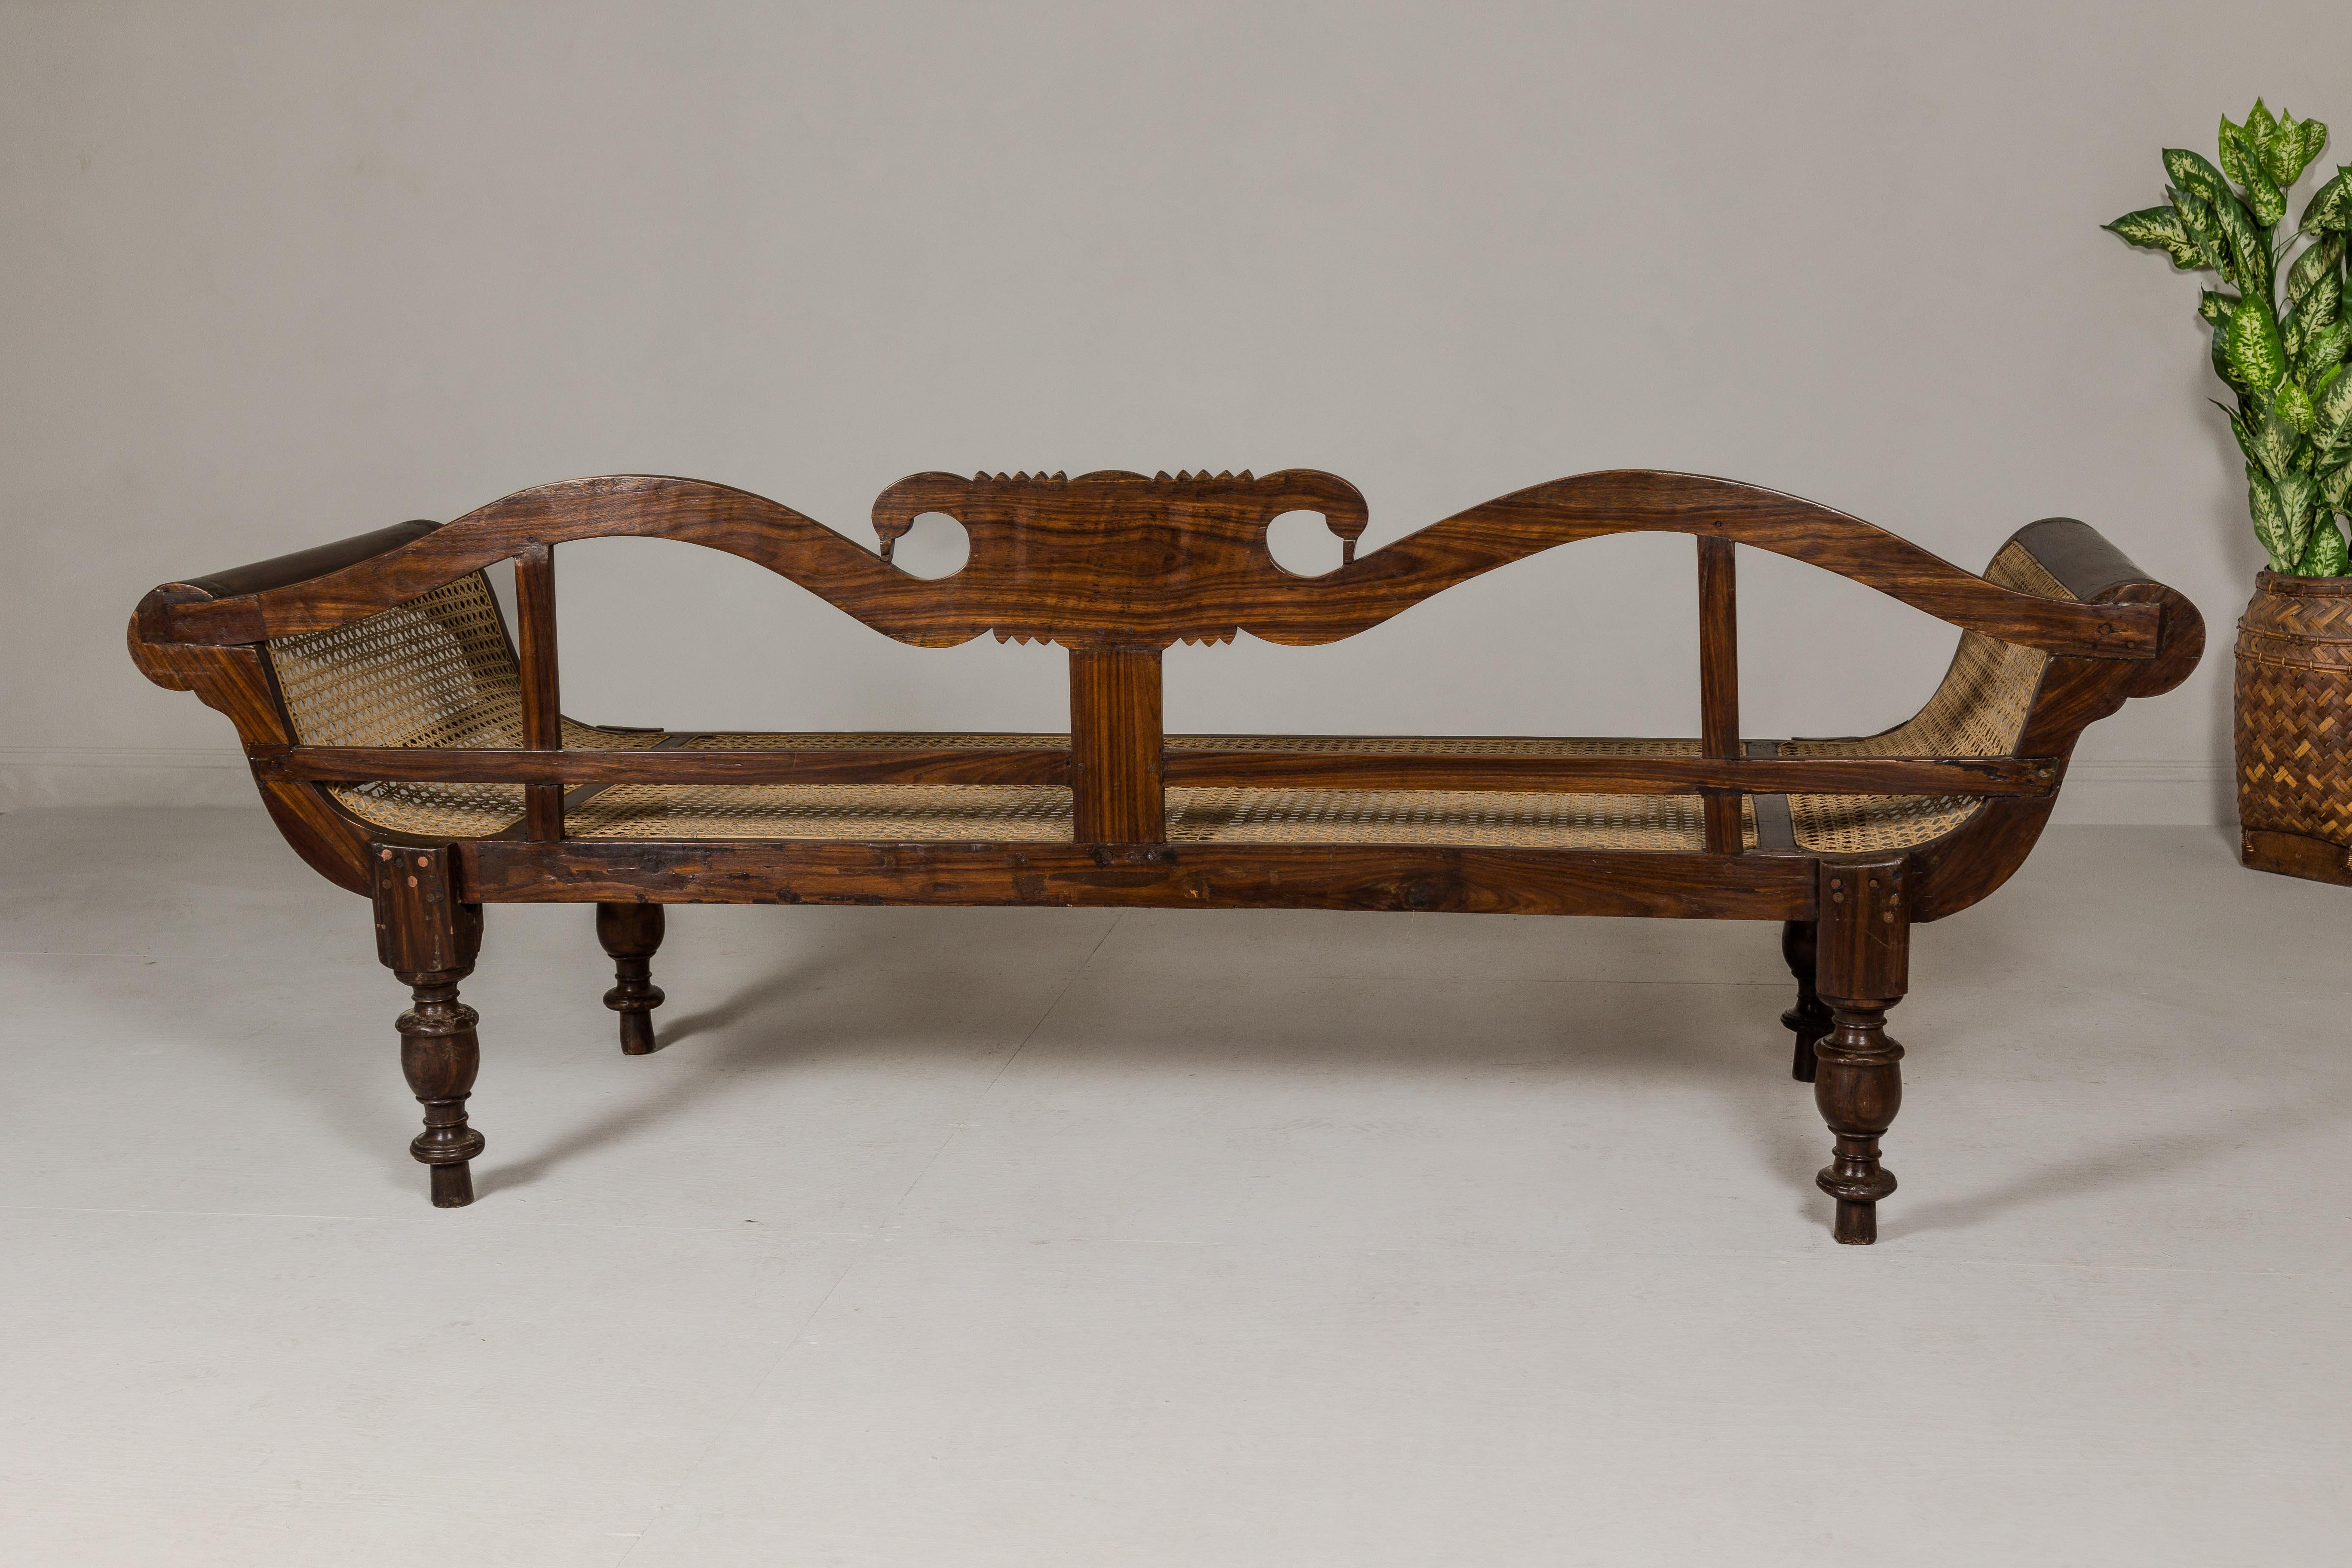 British Colonial Carved and Cane Settee with Swan Neck Back and Scrolling Arms For Sale 11